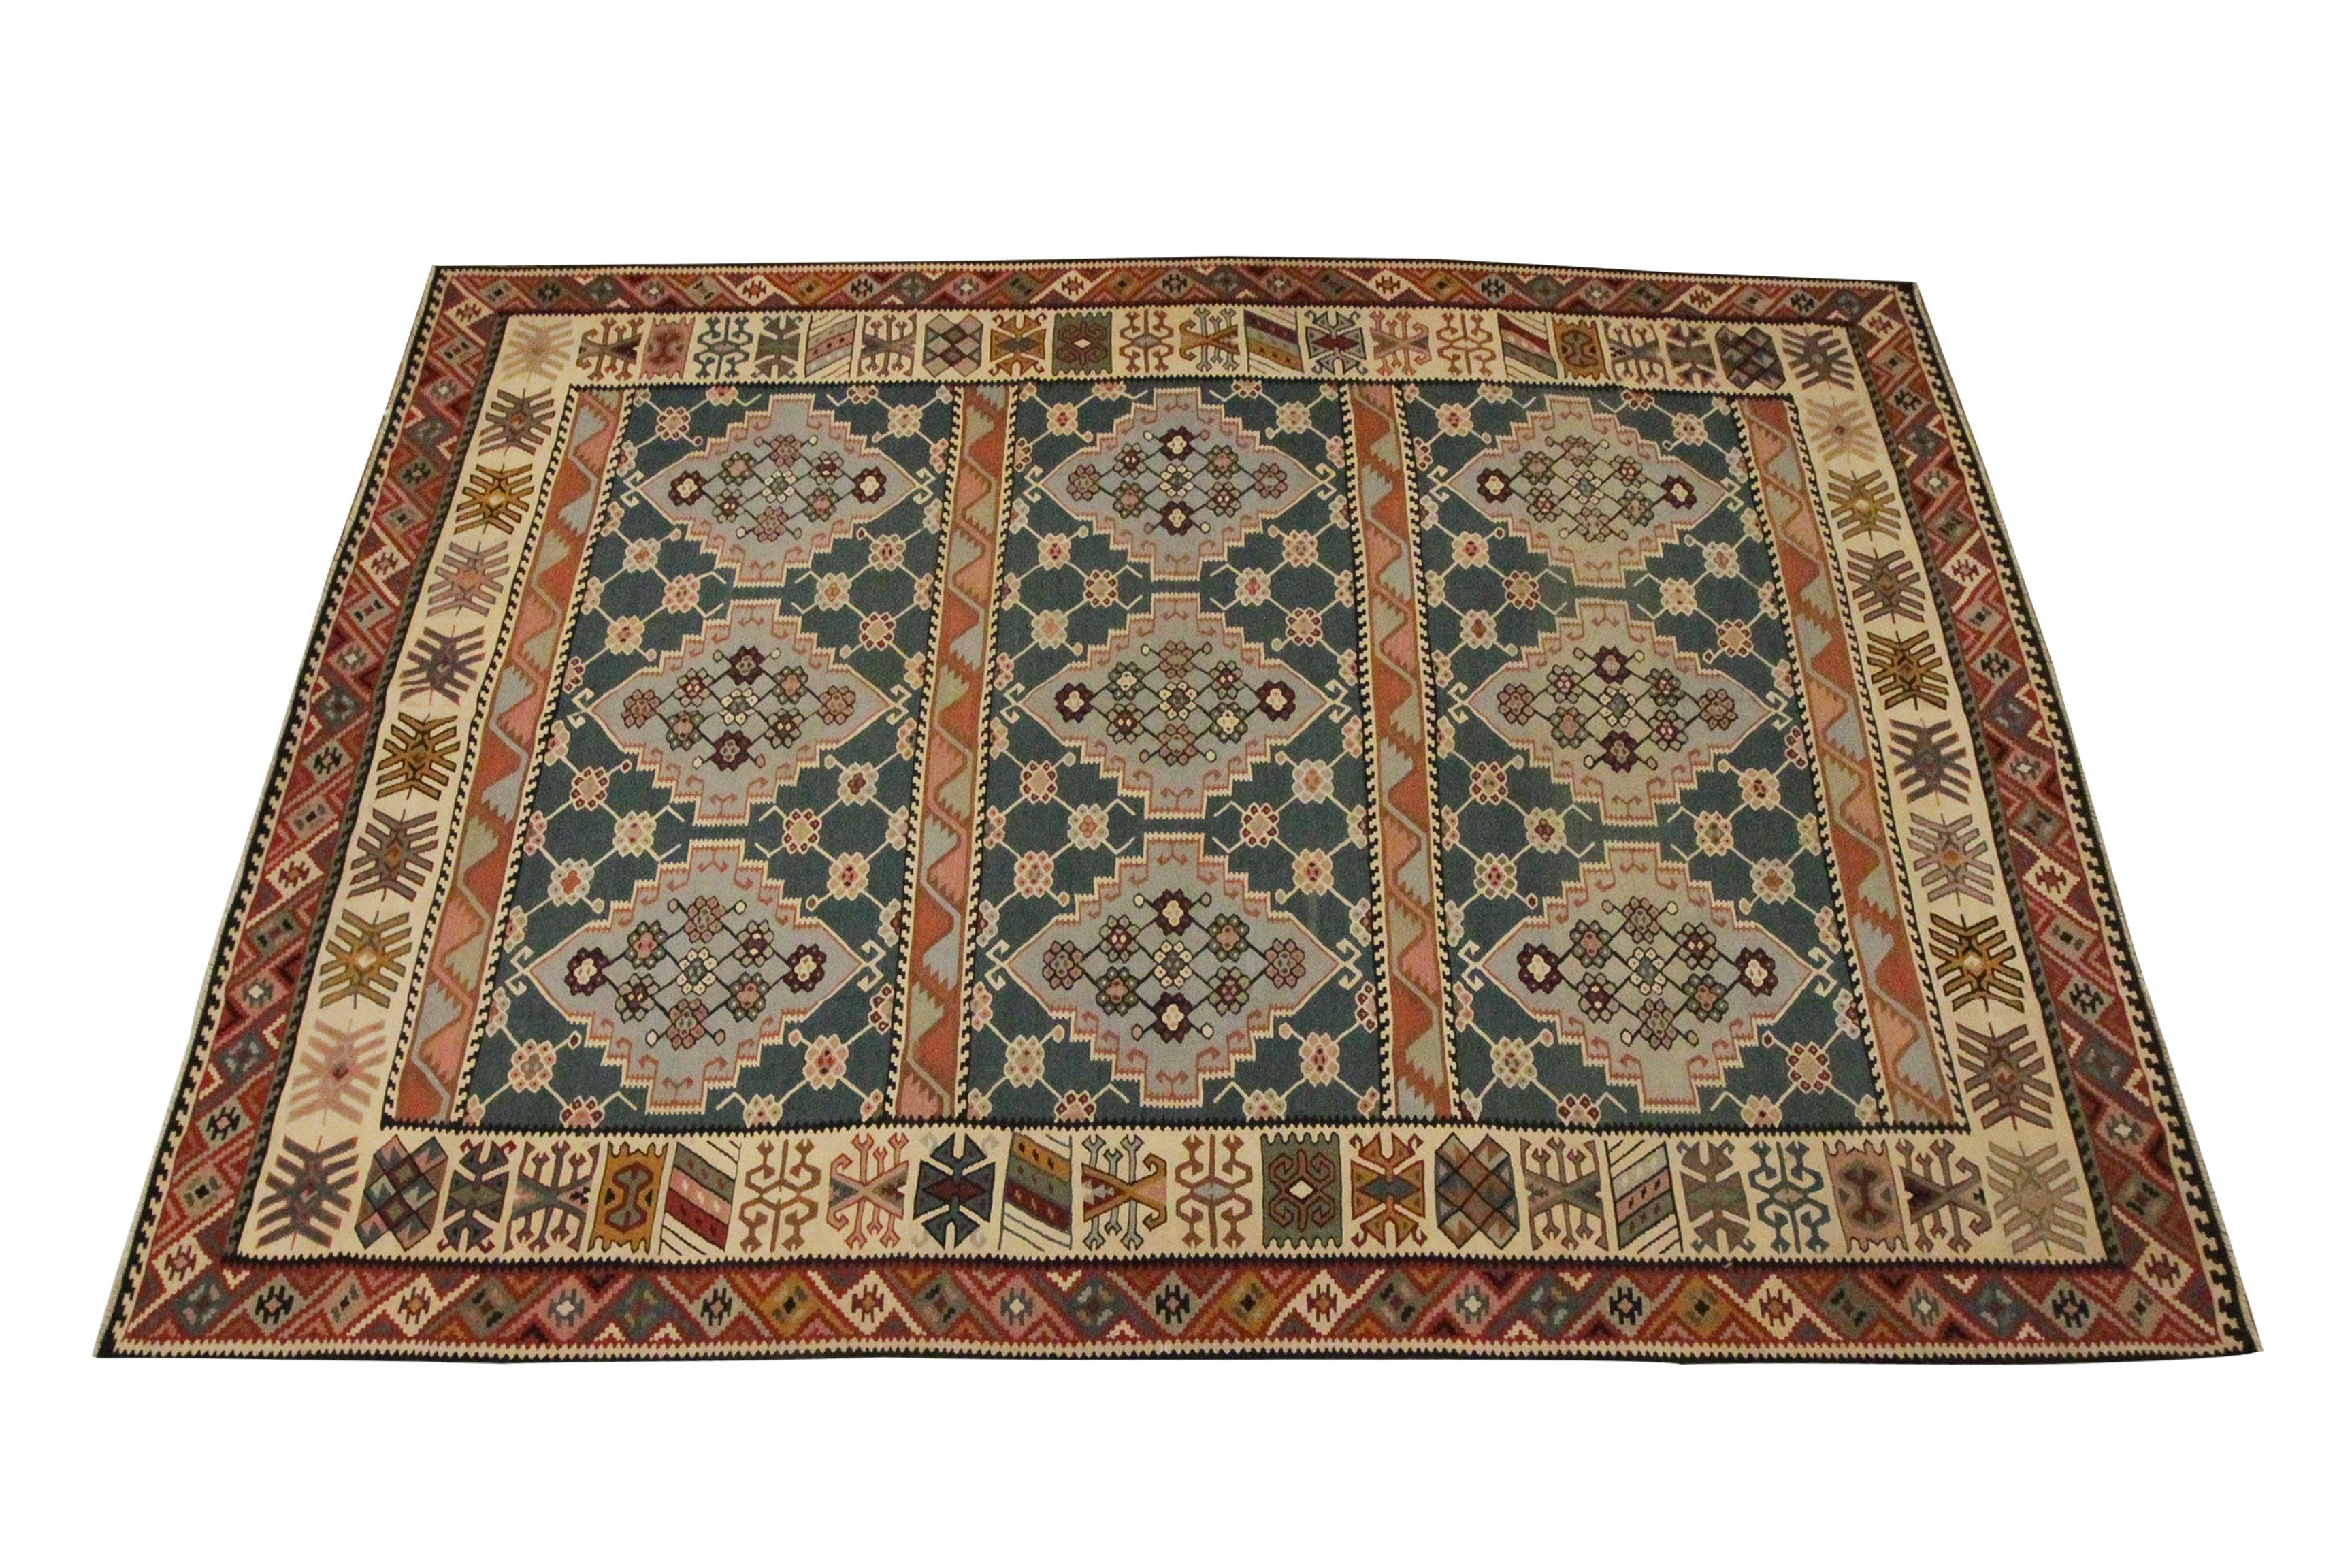 Looking for a new accessory to uplift your home, this antique kilim could be the perfect piece. The central design features a repeat tribal motif pattern woven with a beautiful colour palette. Bold and beautiful with accents of beige, rust, blue and